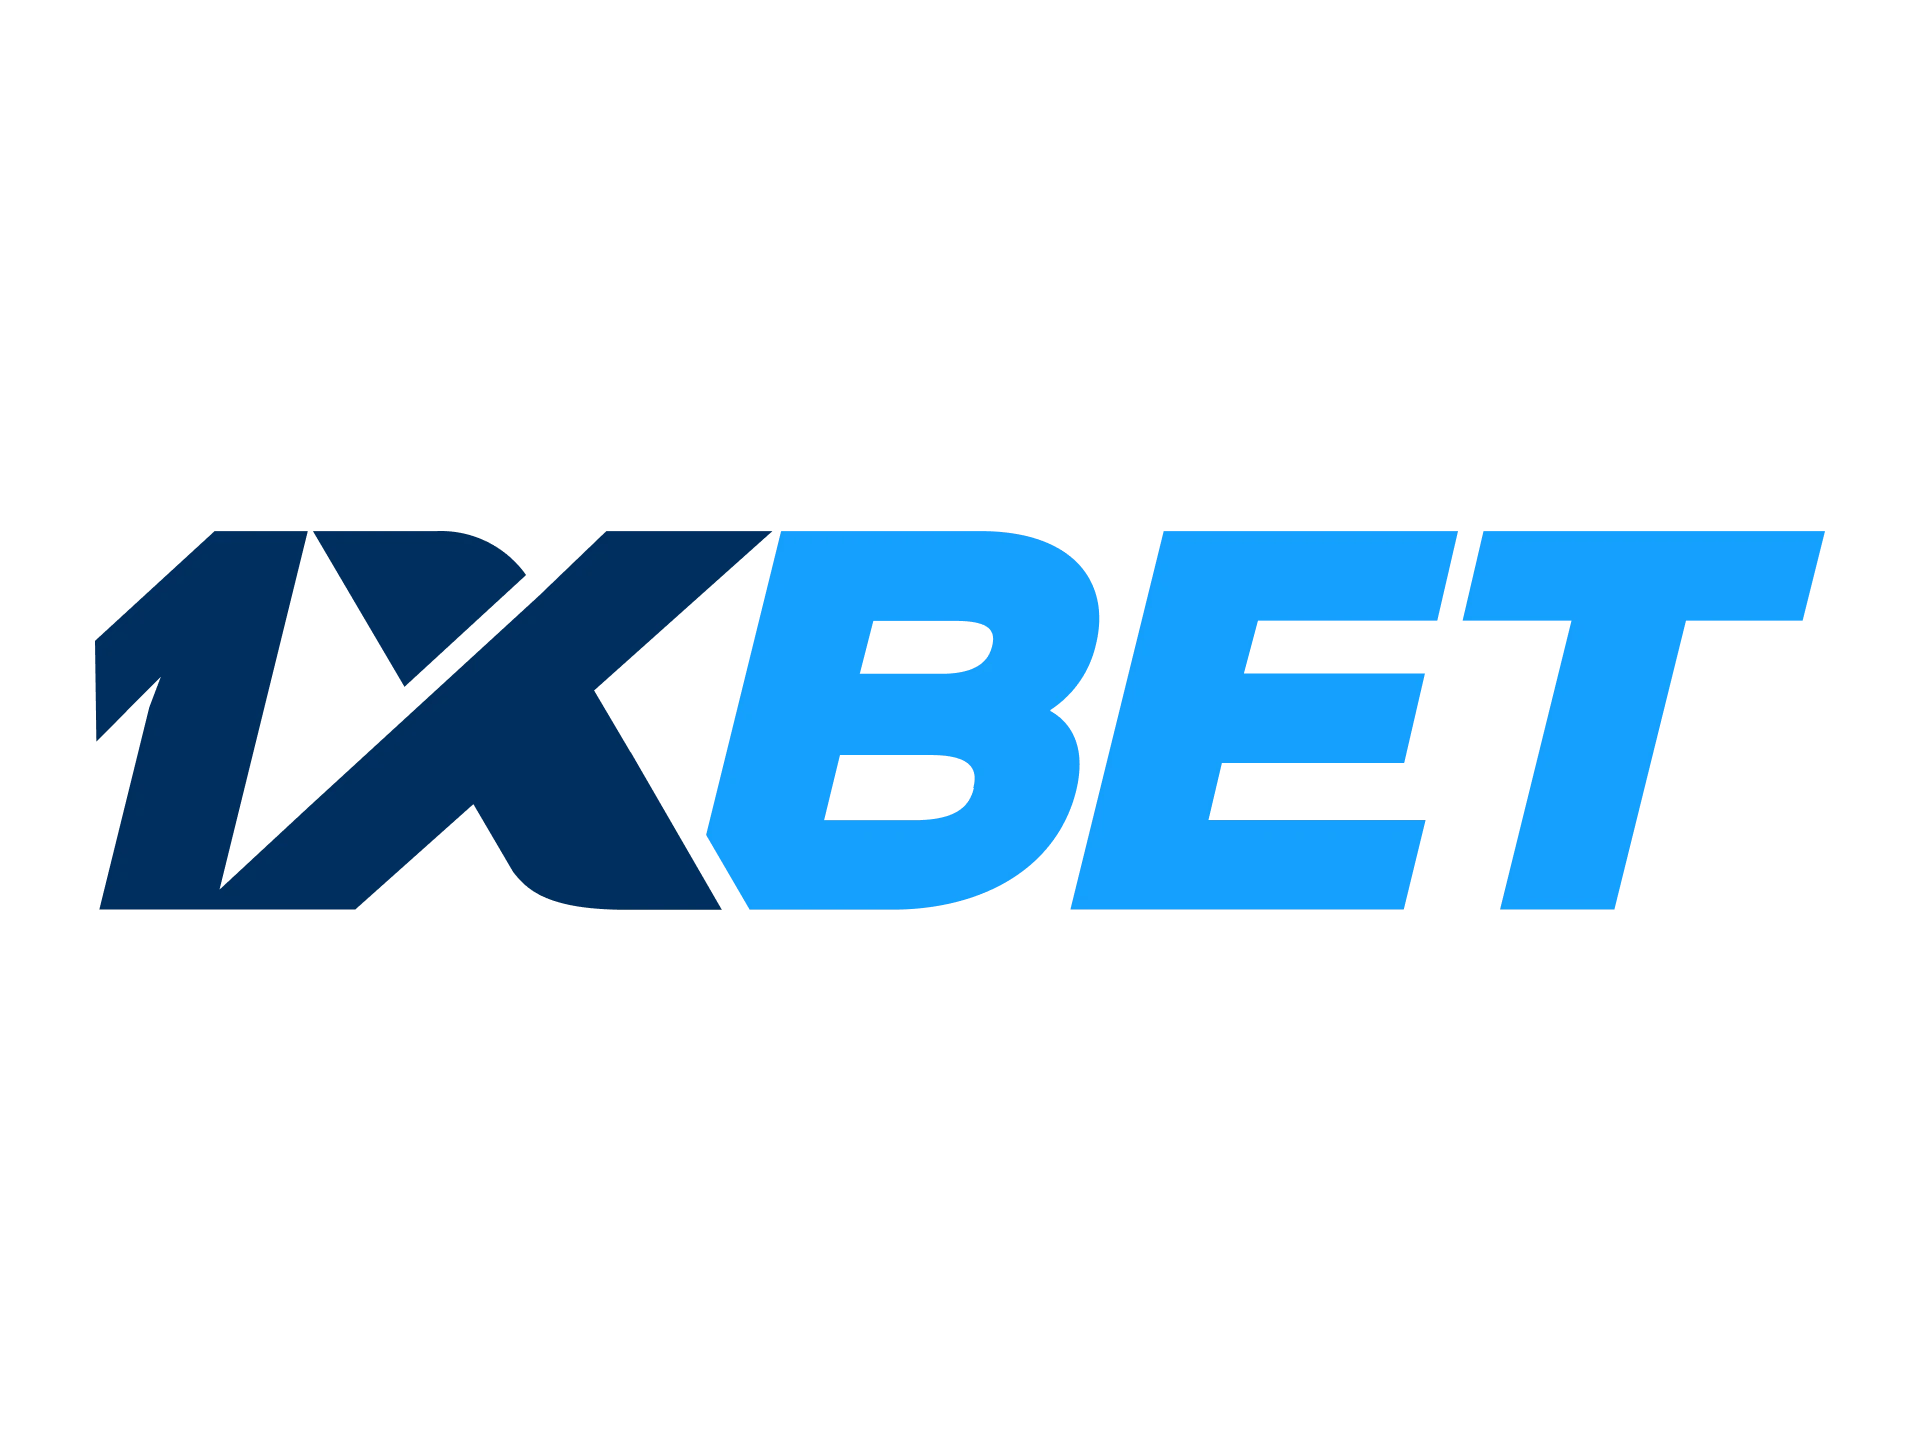 Bet on cricket using the 1xBet app and win big.